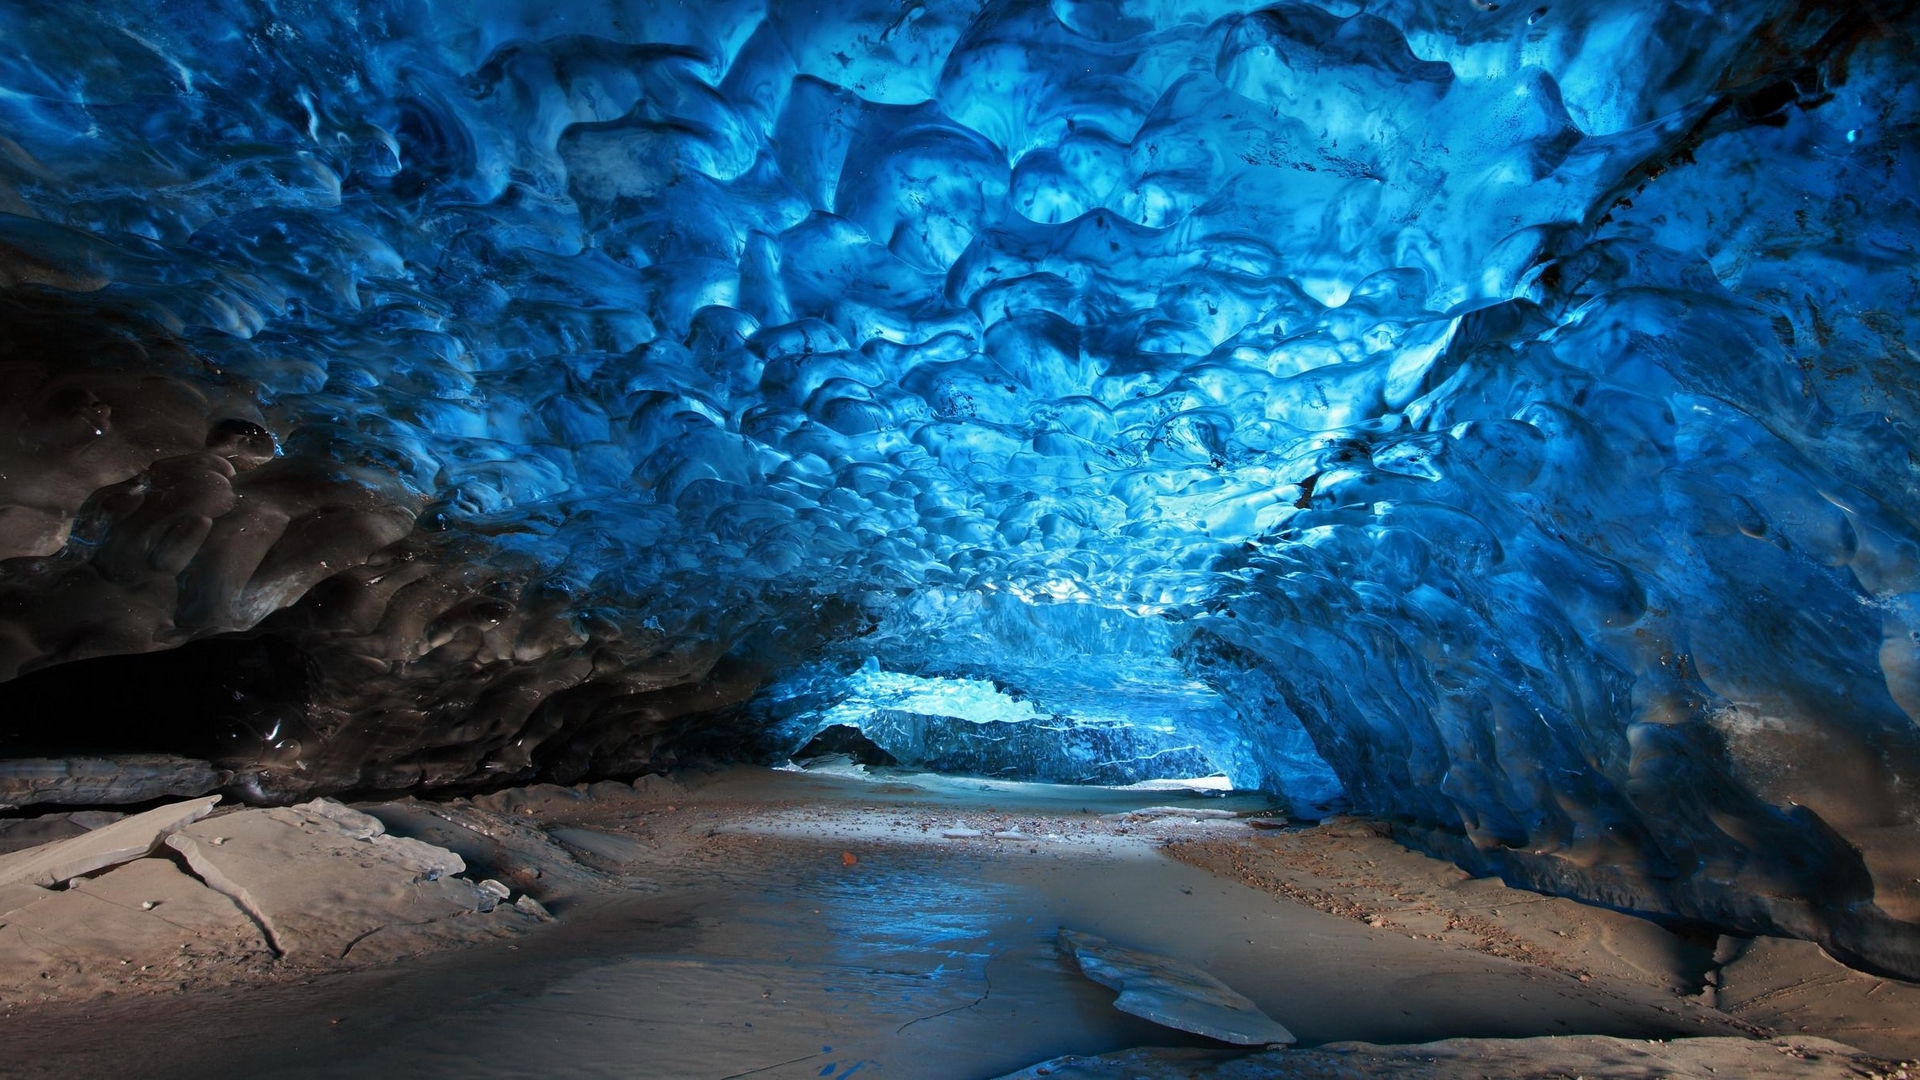 Blue Ice Cave Wallpaper Photography 9951 Wallpaper High Resolution 1920x1080